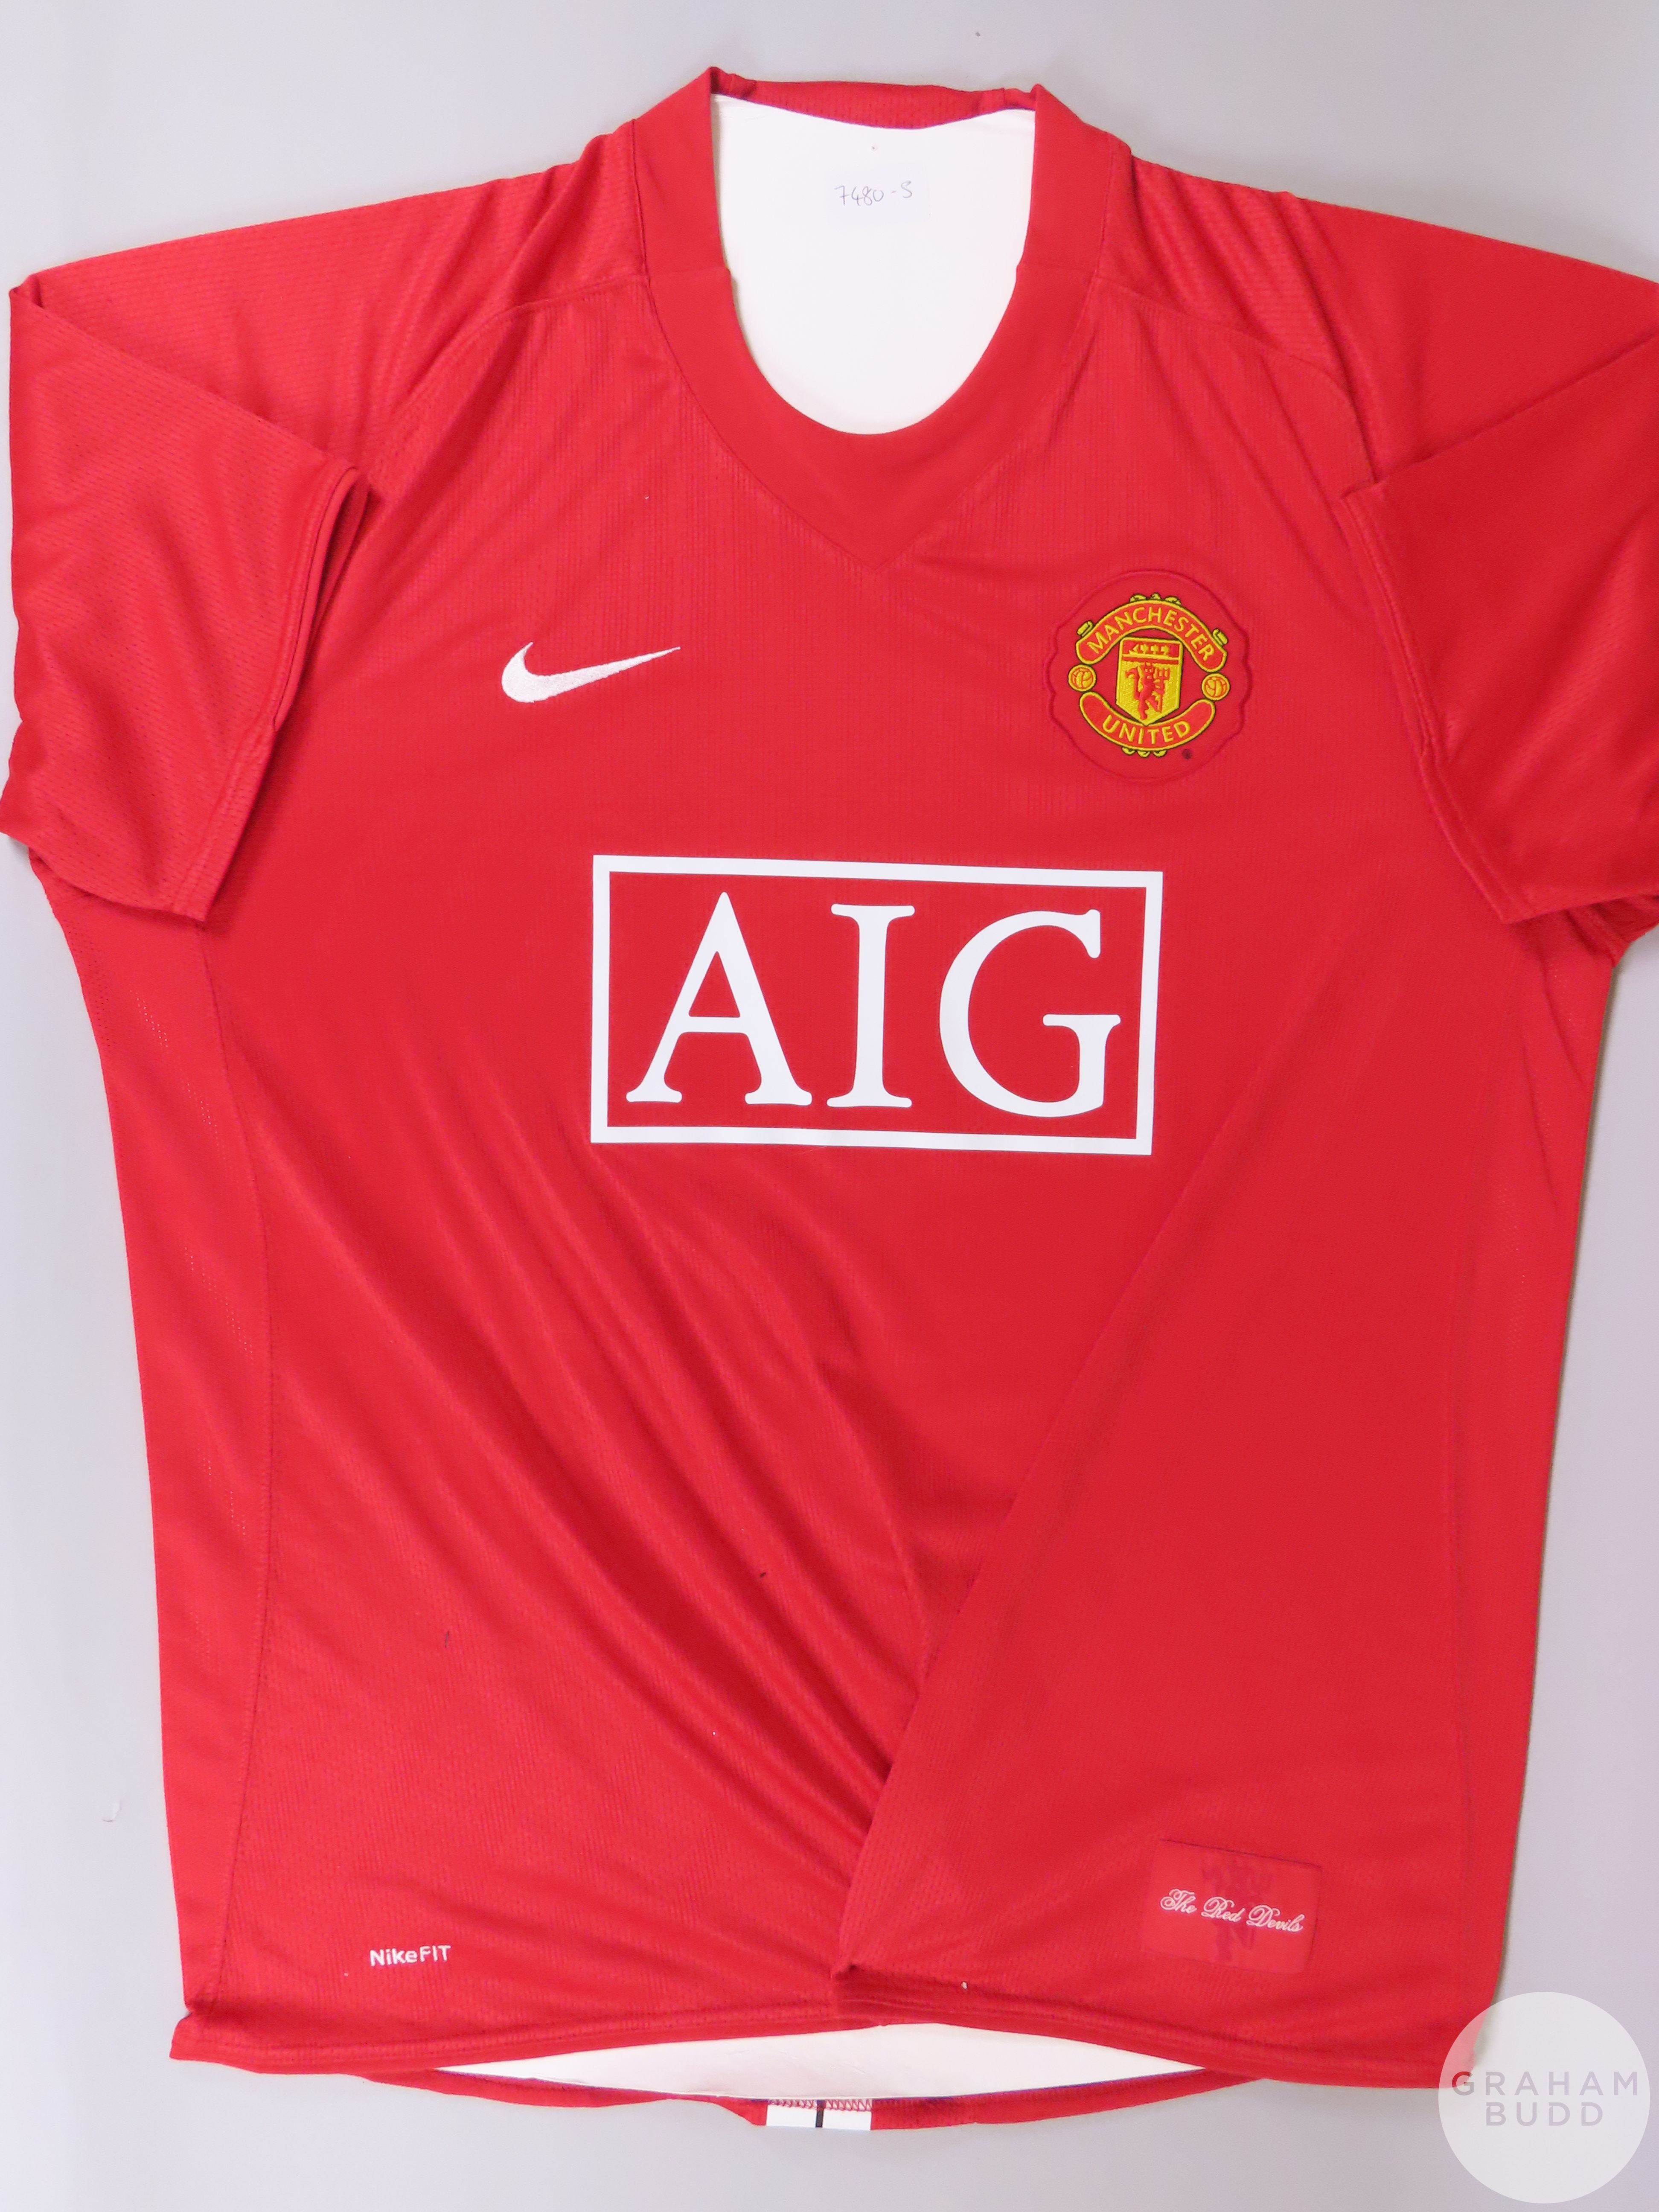 Red Manchester United No.10 replica Wayne Rooney autographed shirt - Image 2 of 2